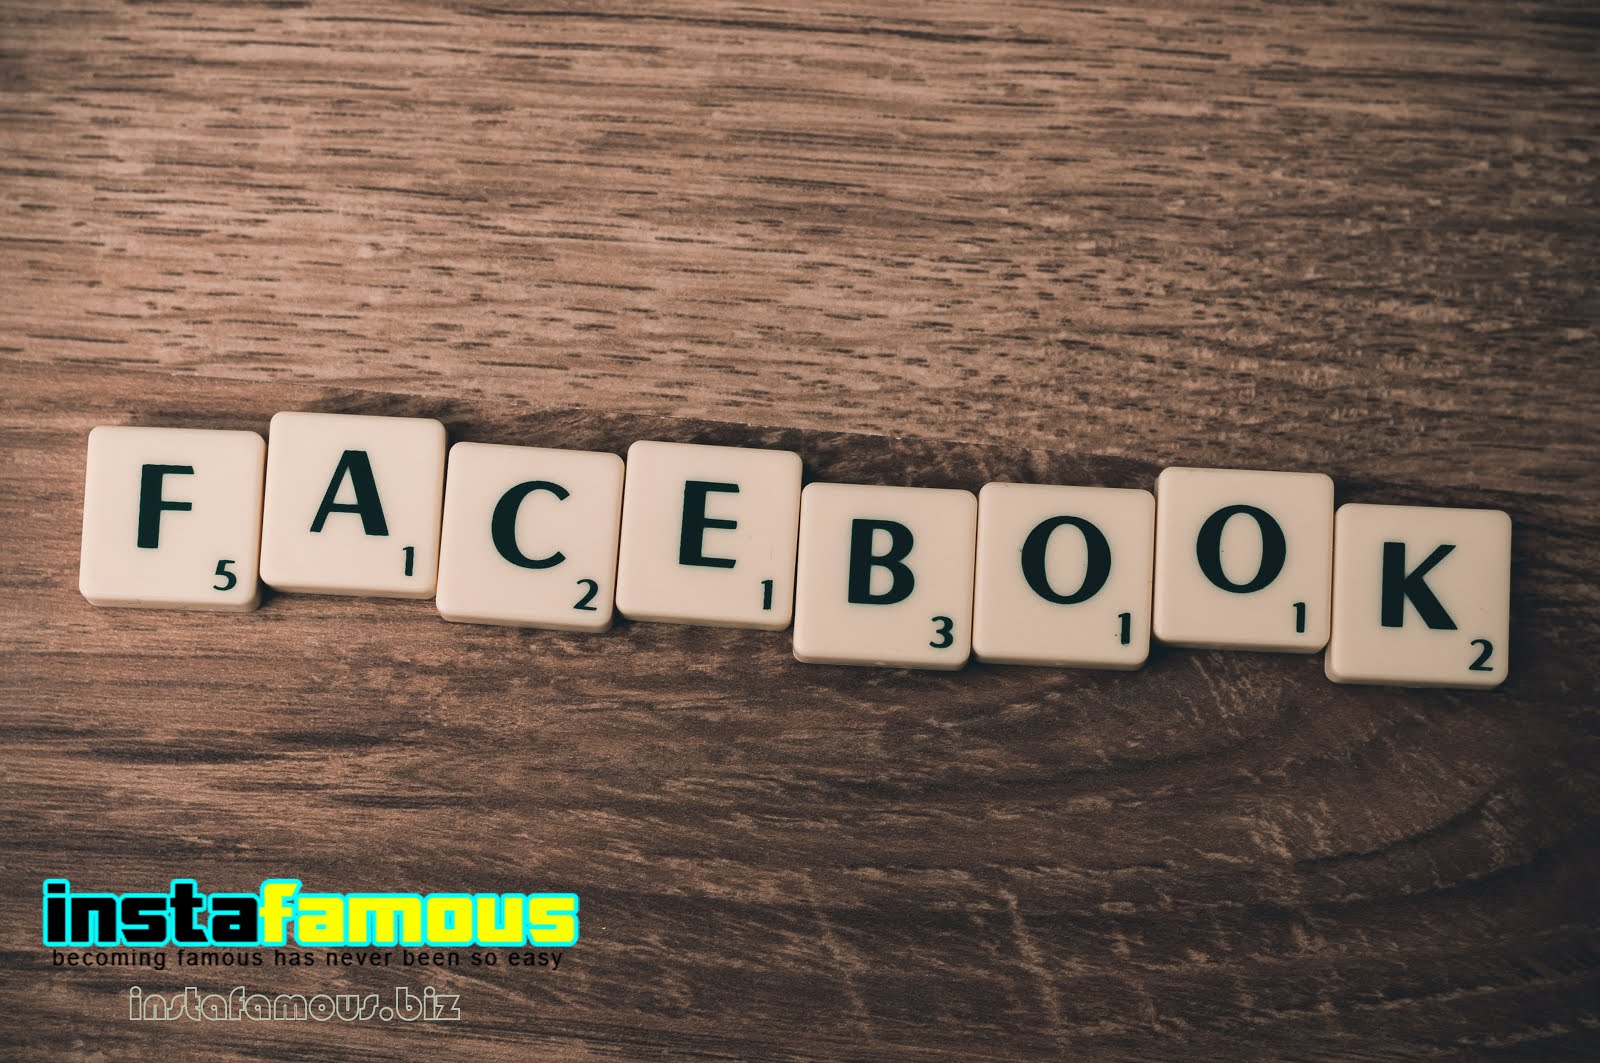 Buy Facebook Likes Cheap - Fast Delivery Guaranteed